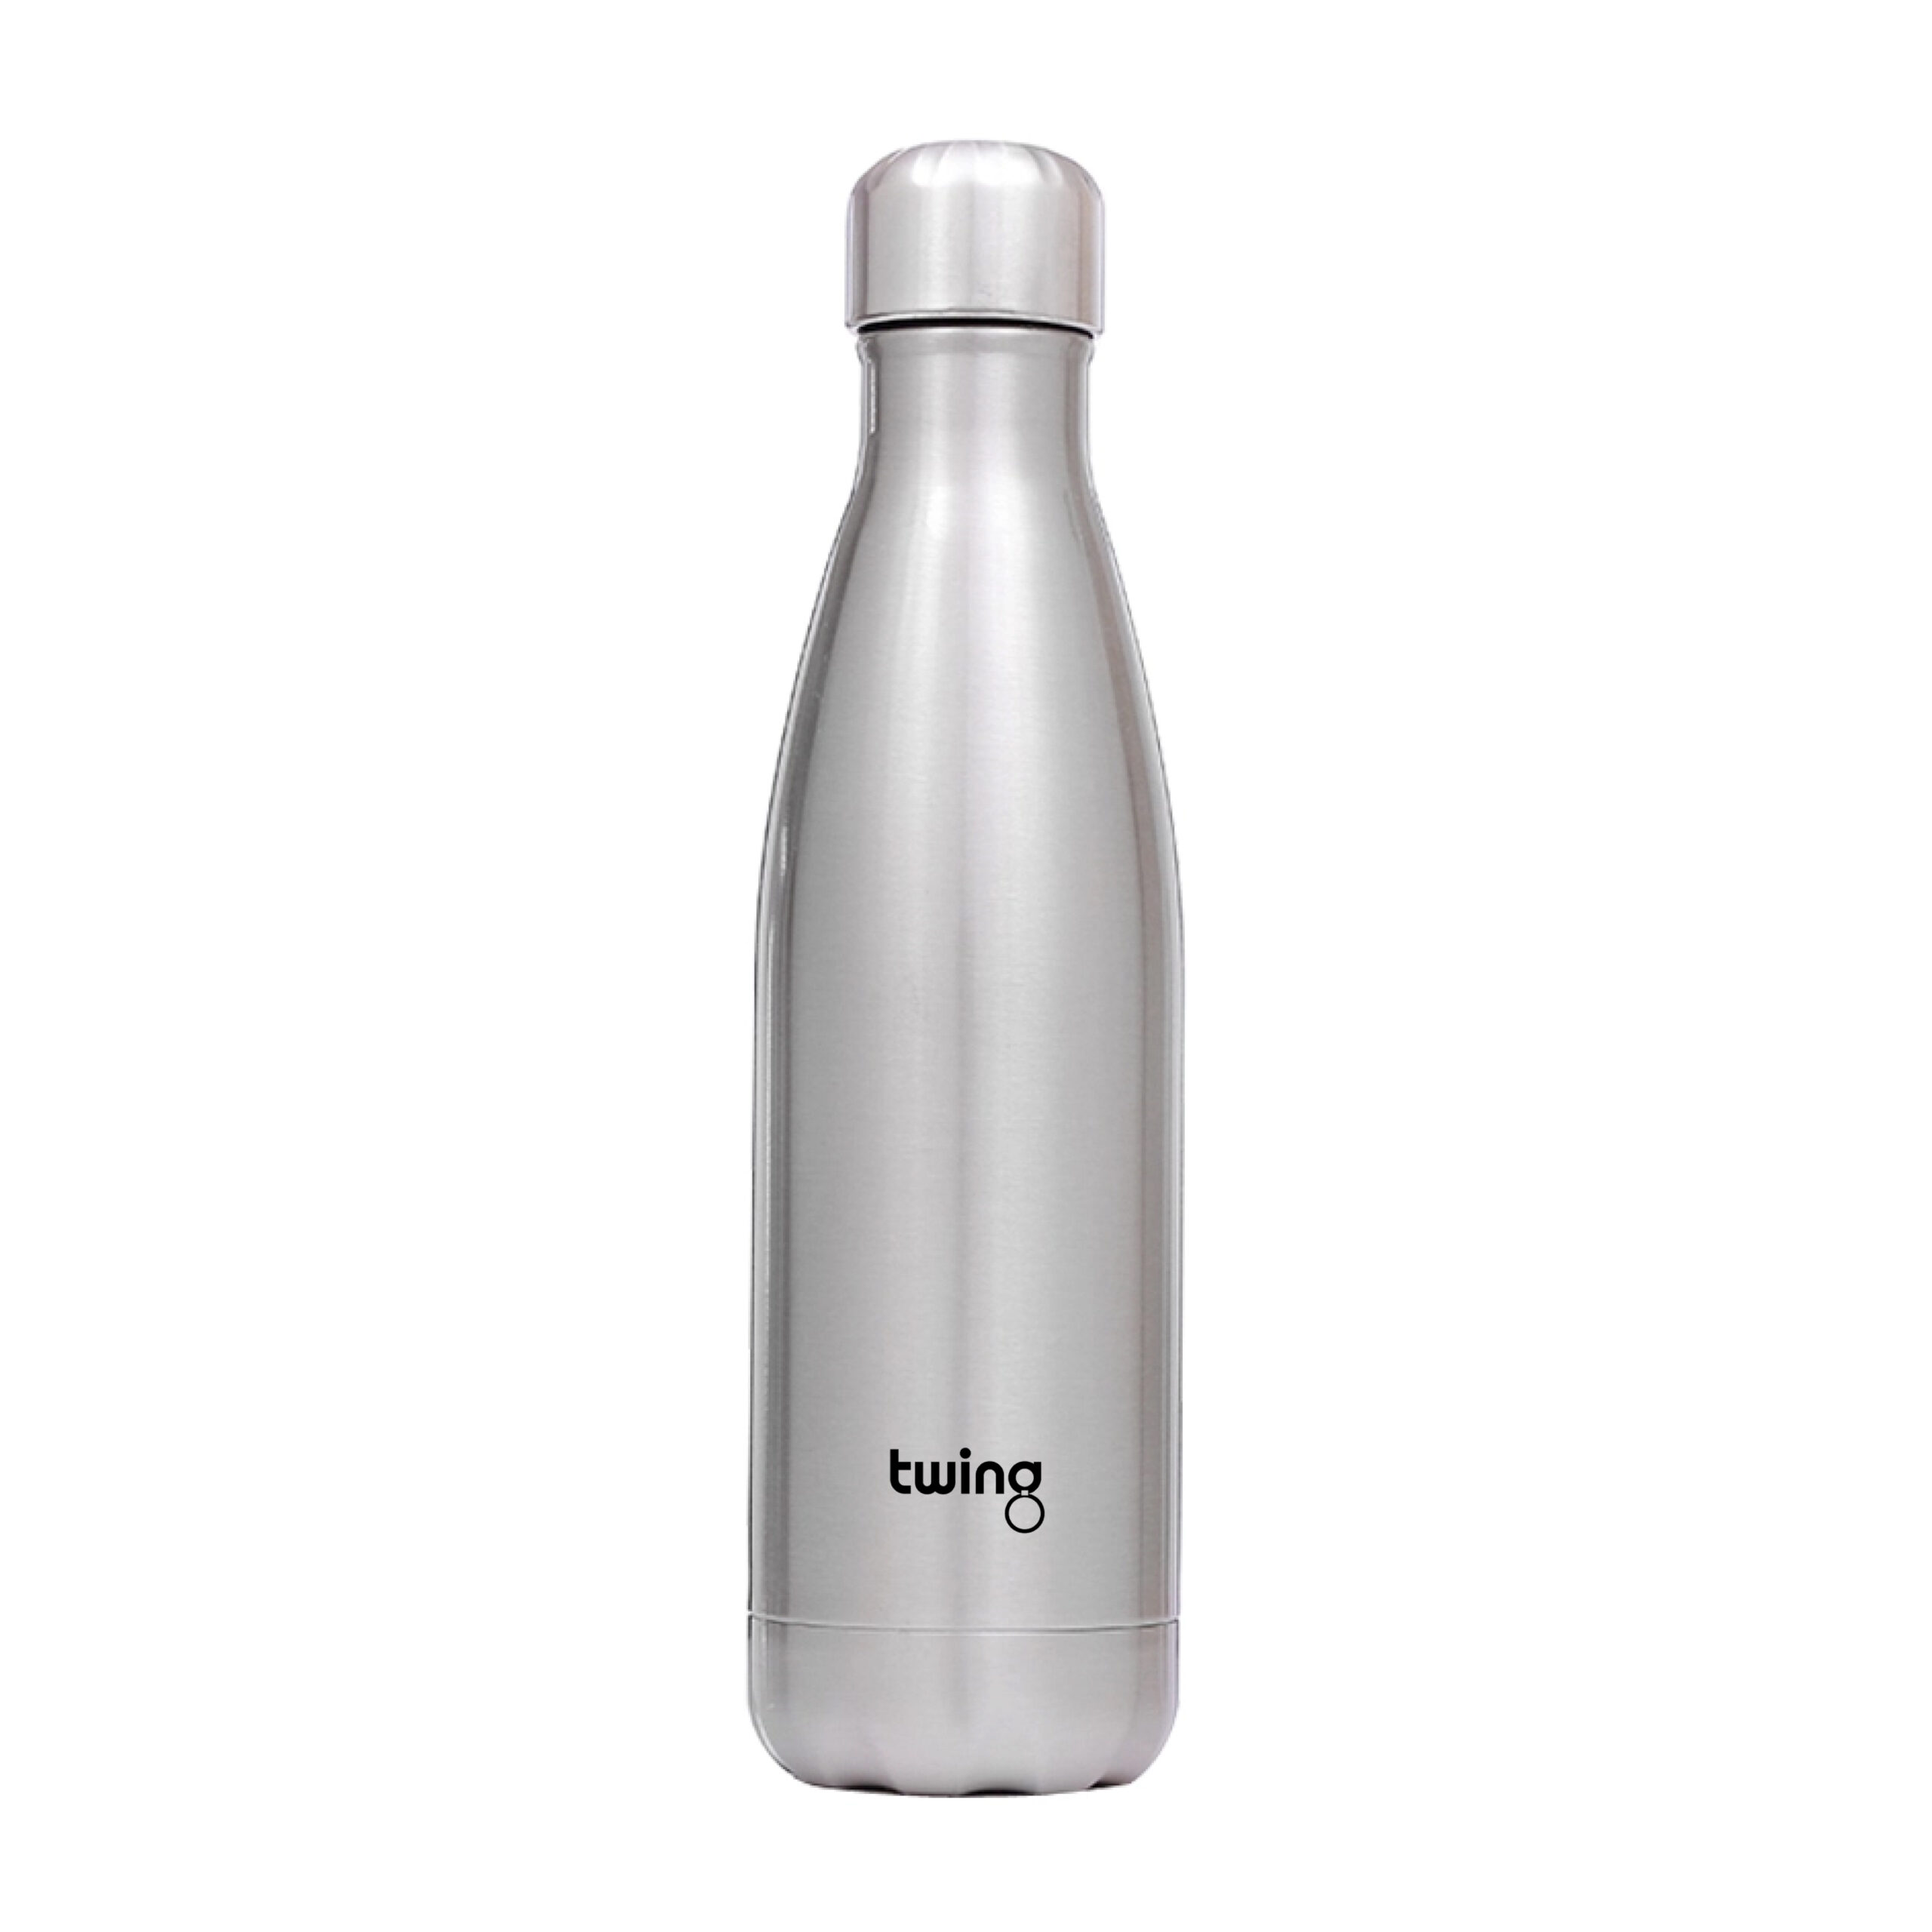 Twing Trinkflasche silber